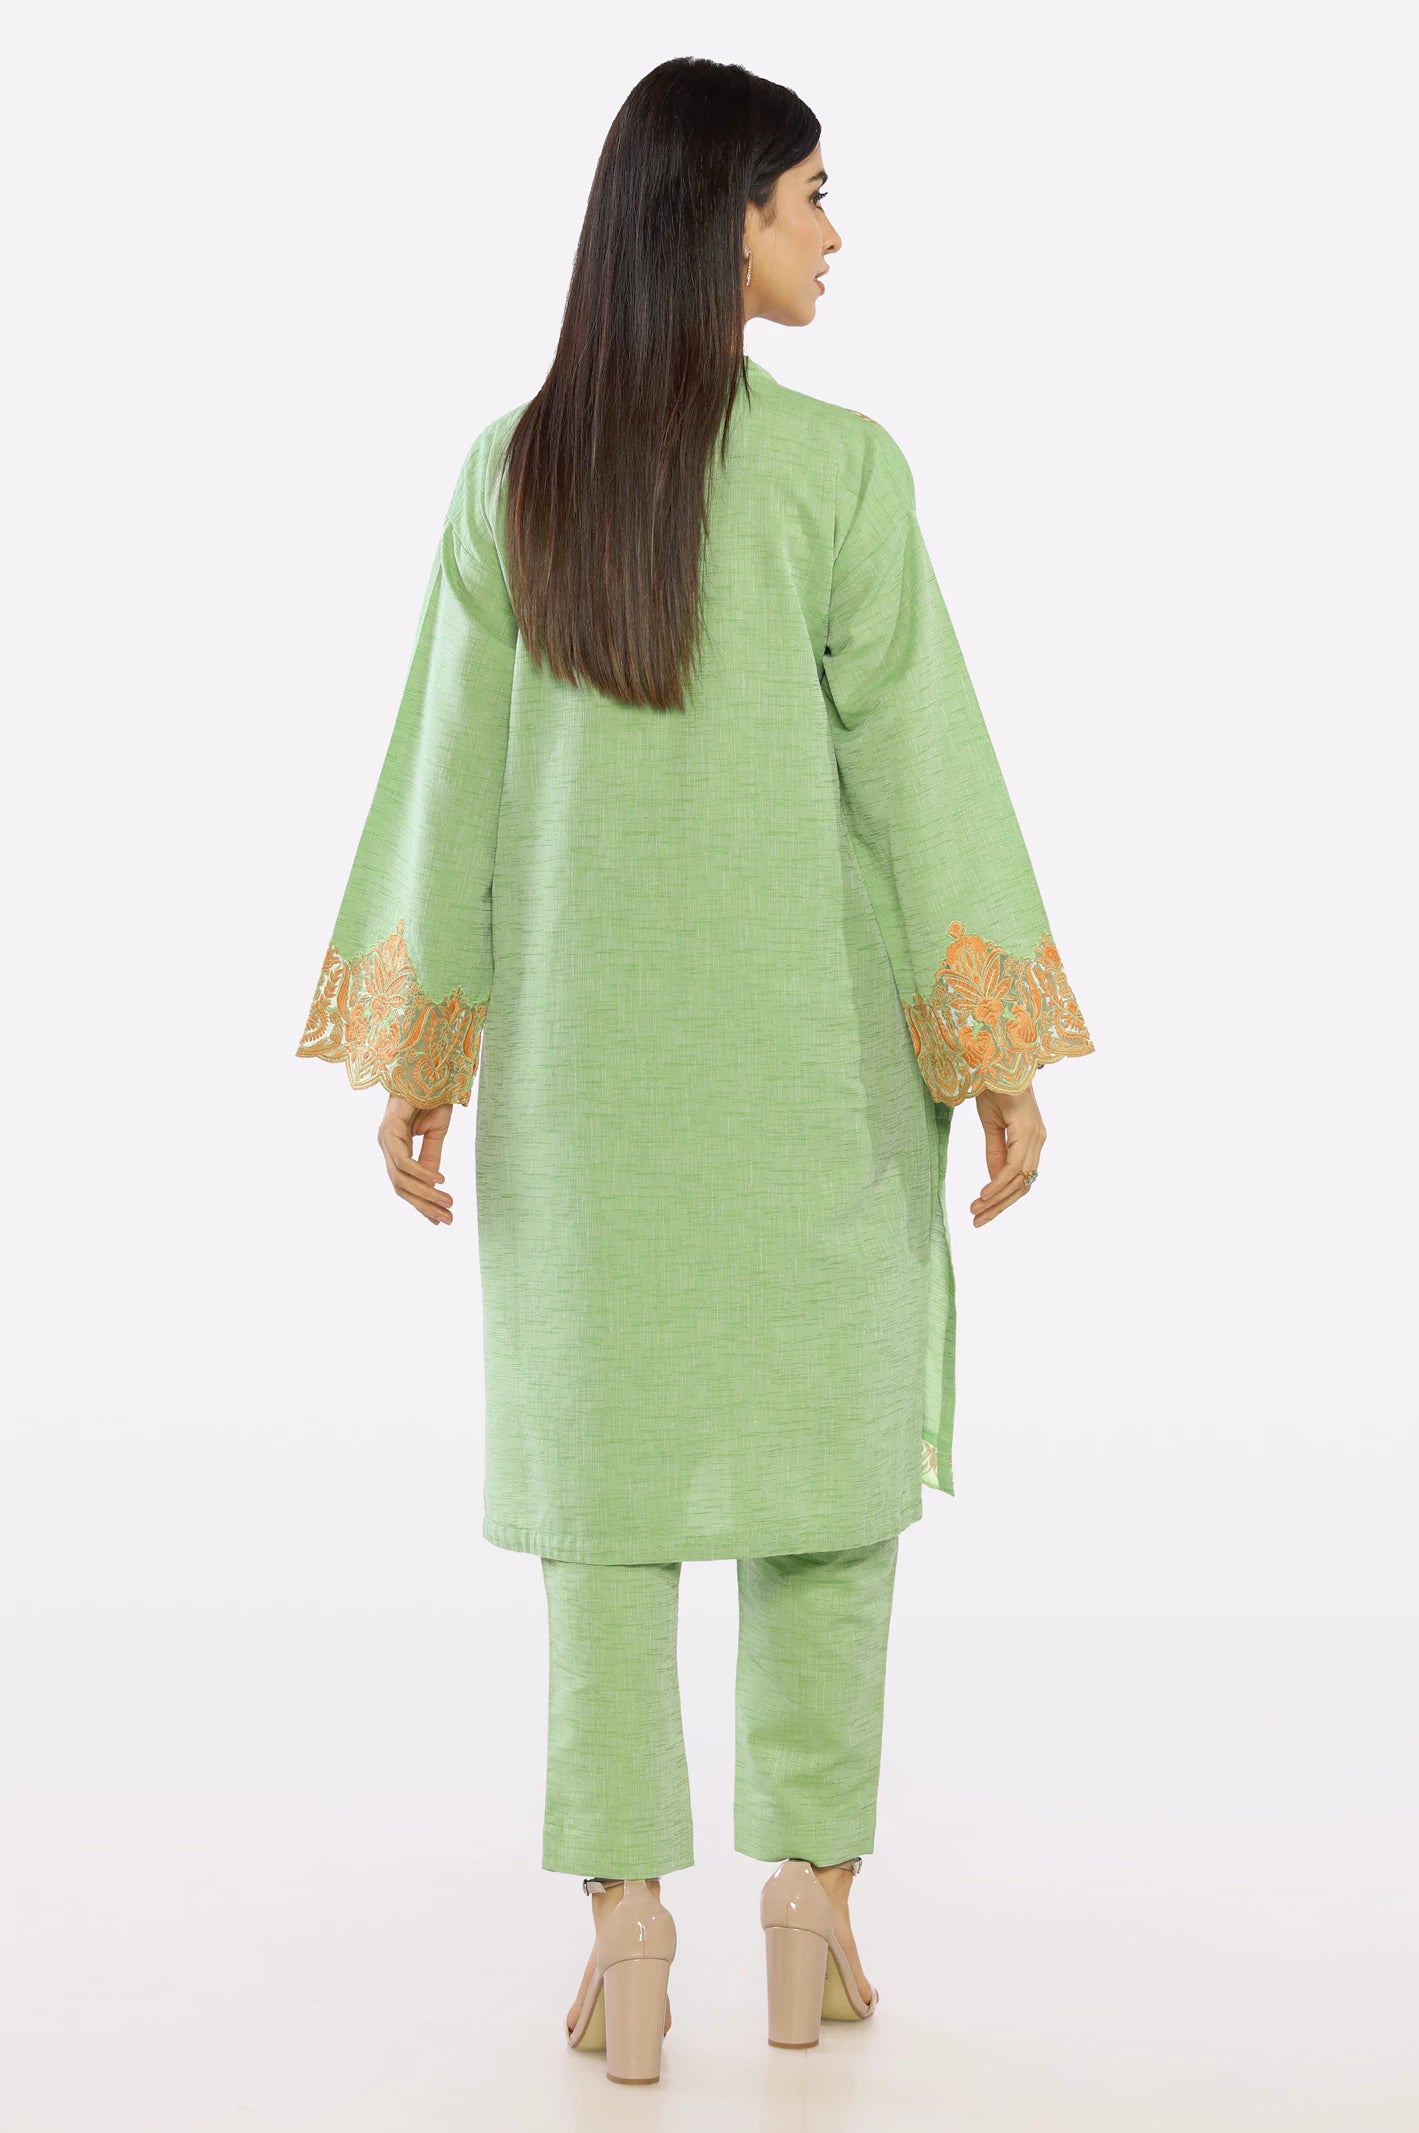 2PC Ready To Wear Green Embroidered Suit